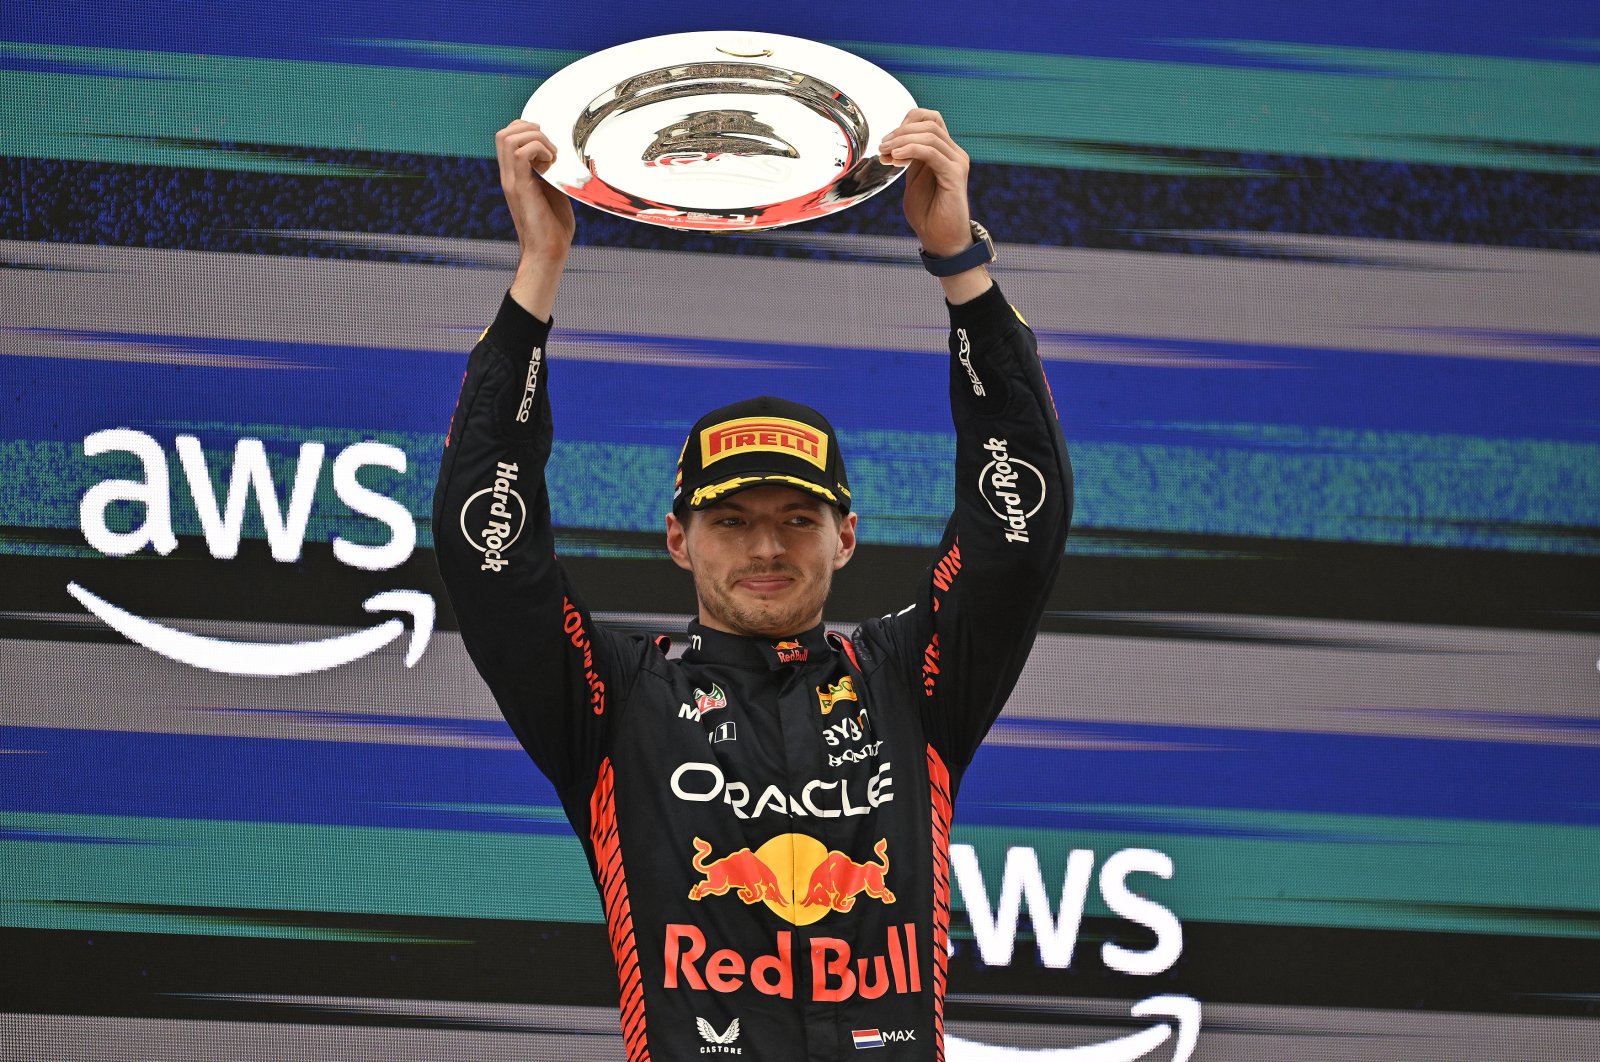 Red Bull Racing Dutch driver Max Verstappen lifts the trophy after winning the eighth Formula One race of the 2023 season in the Spanish GP at the &quot;Barcelona-Catalunya&quot; circuit in the city of Barcelona, Spain, June 4, 2023. (AA Photo)